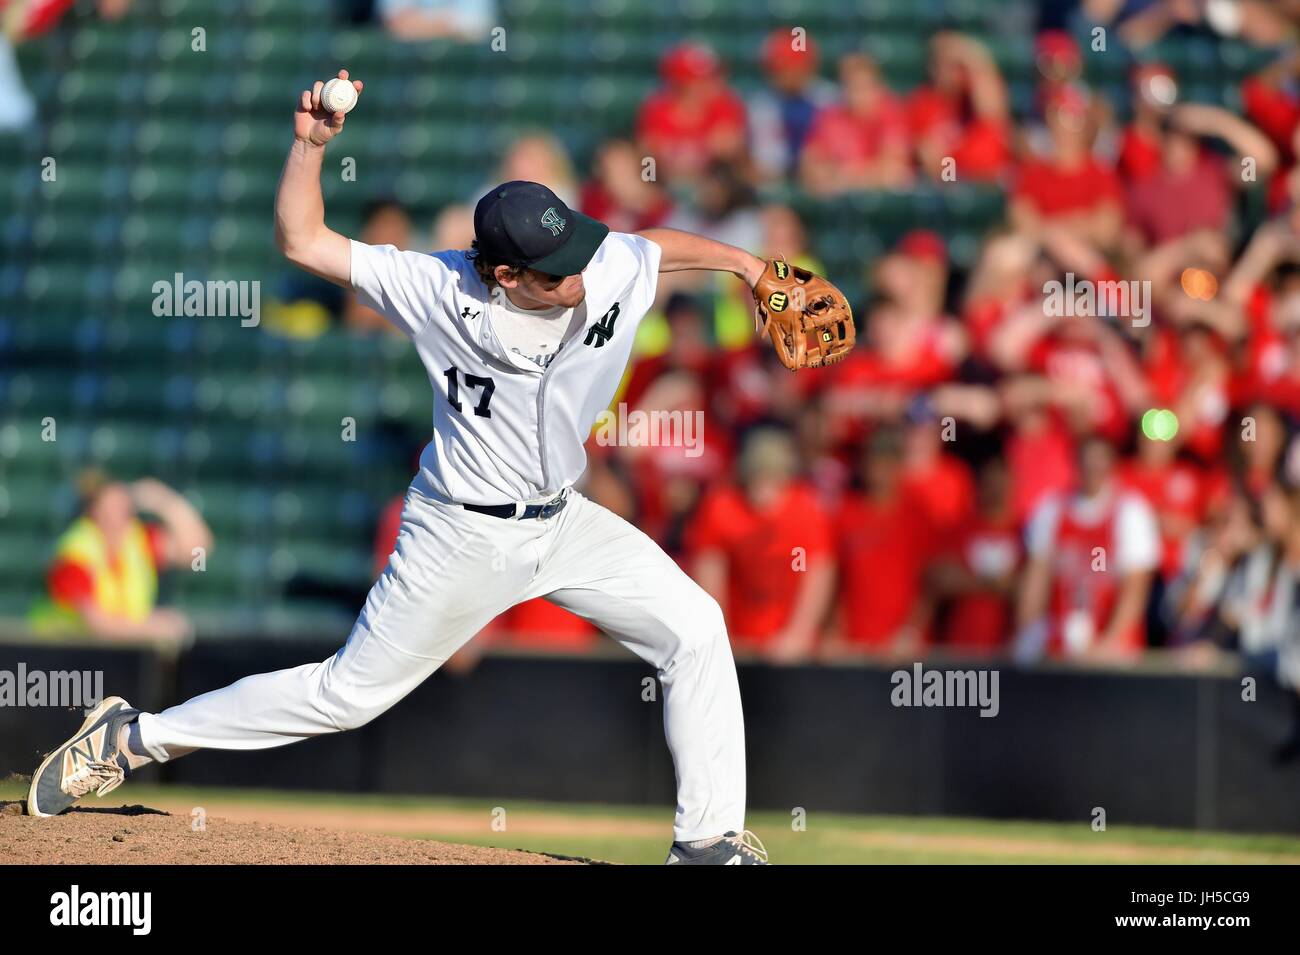 Pitcher delivering a pitch to an opposing hitter during a high school baseball game. USA. Stock Photo